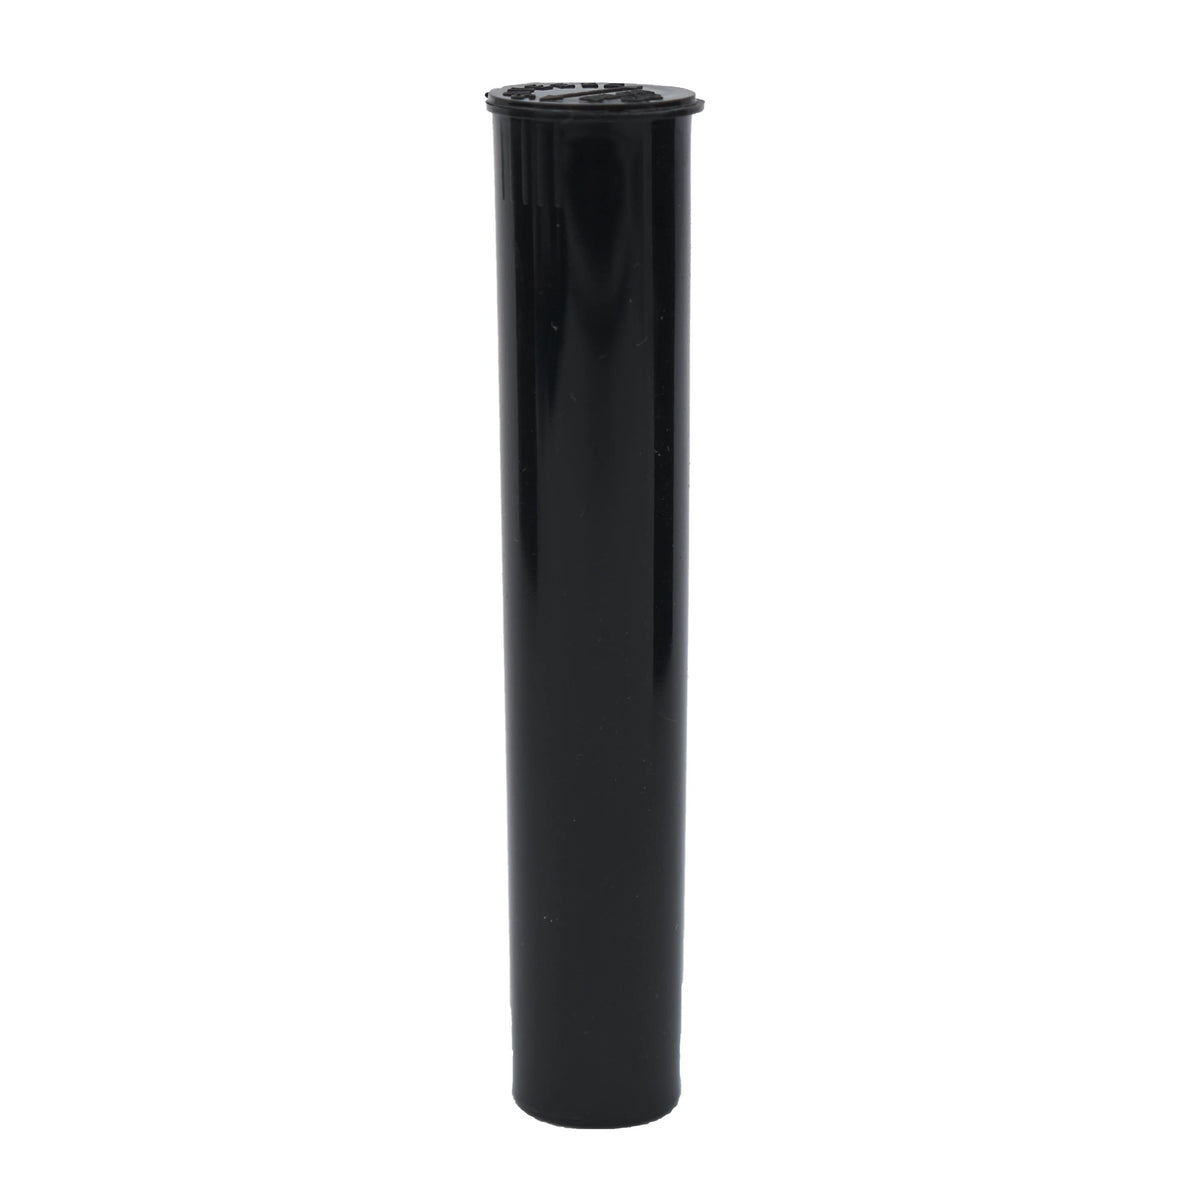 Wide Squeeze Top Child-Resistant Pre-Roll Tube